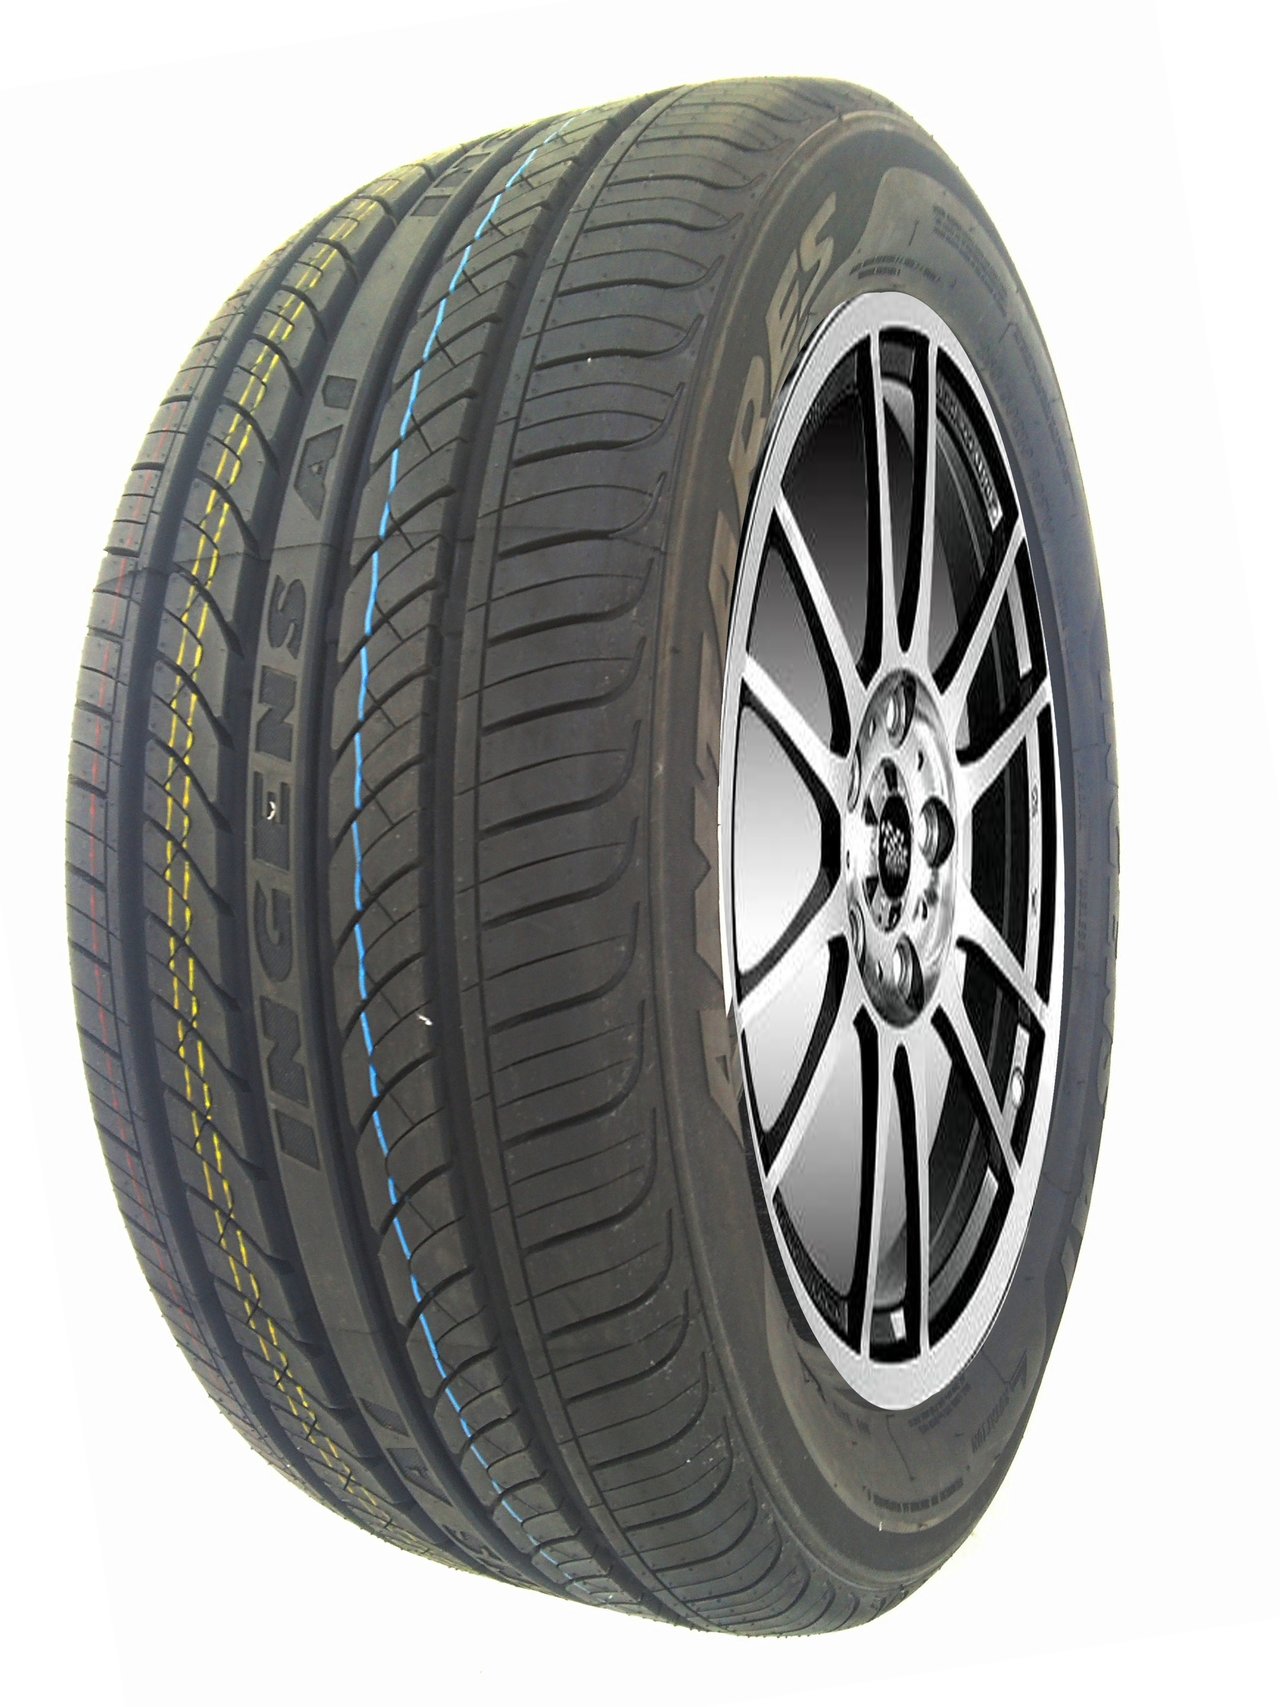 Antares Ingens A1 175/70R13 82T TL M+S